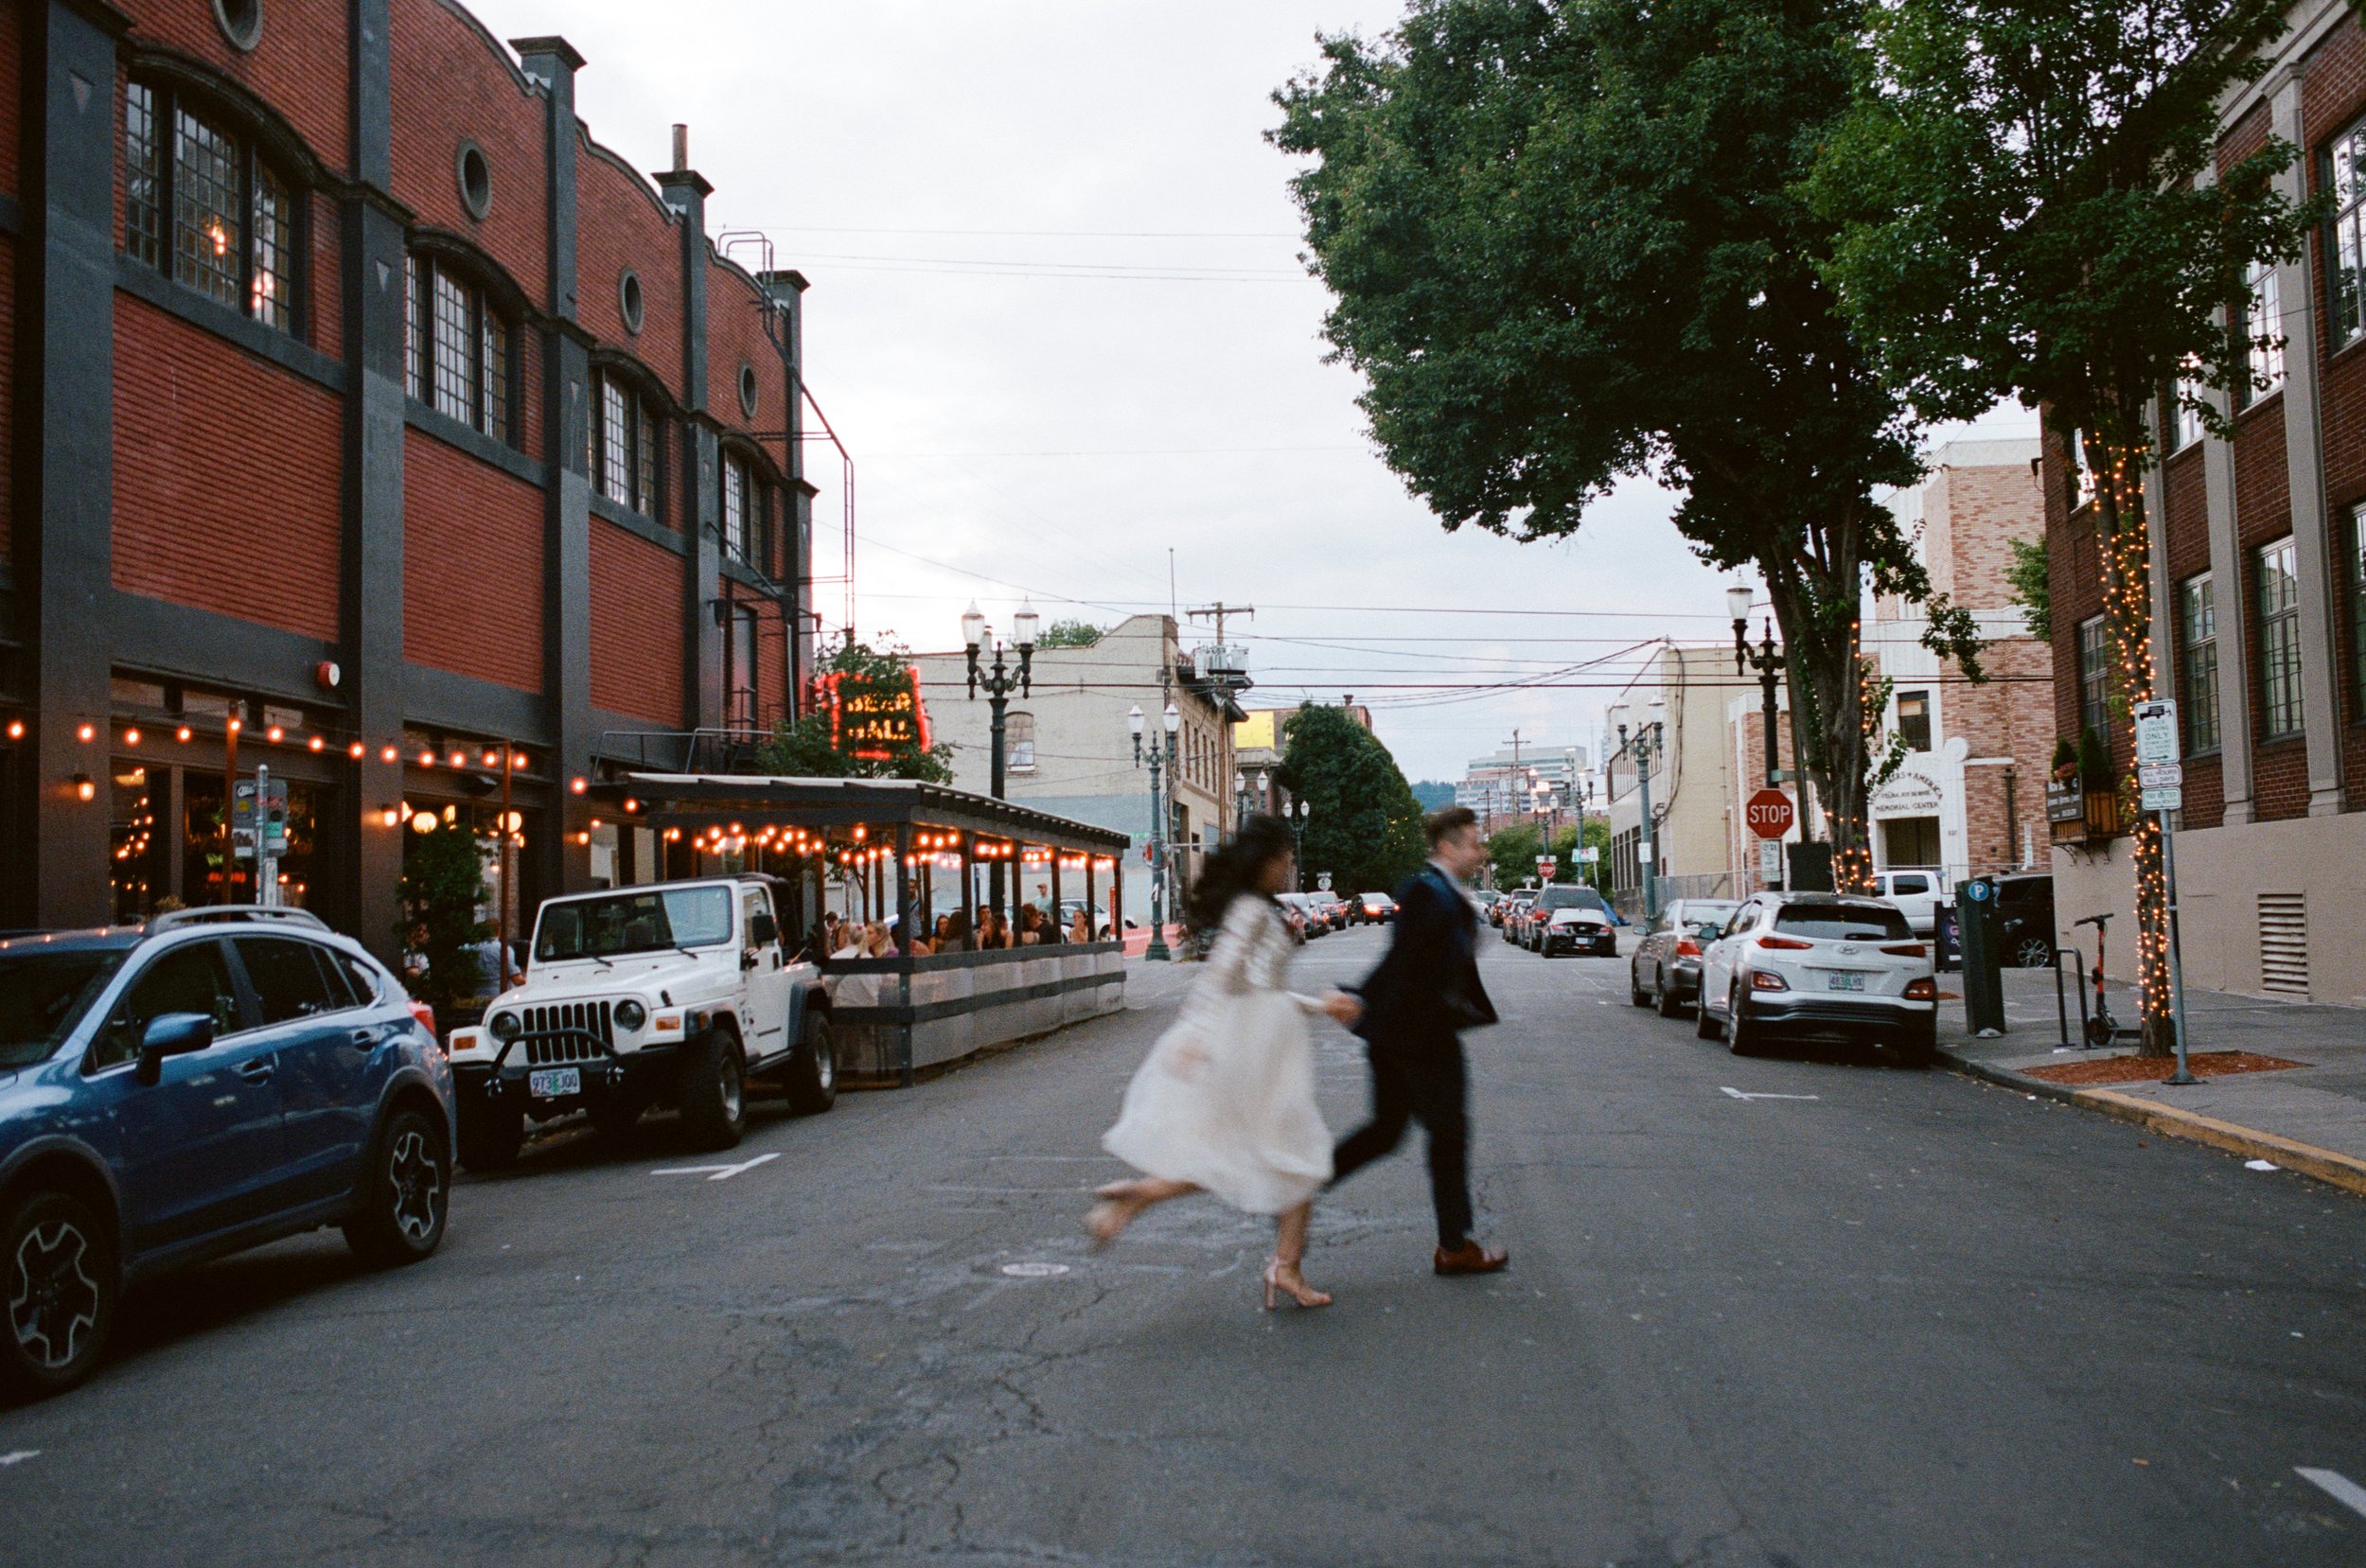 man and woman running through street after wedding ceremony. Wedding film photography, oregon